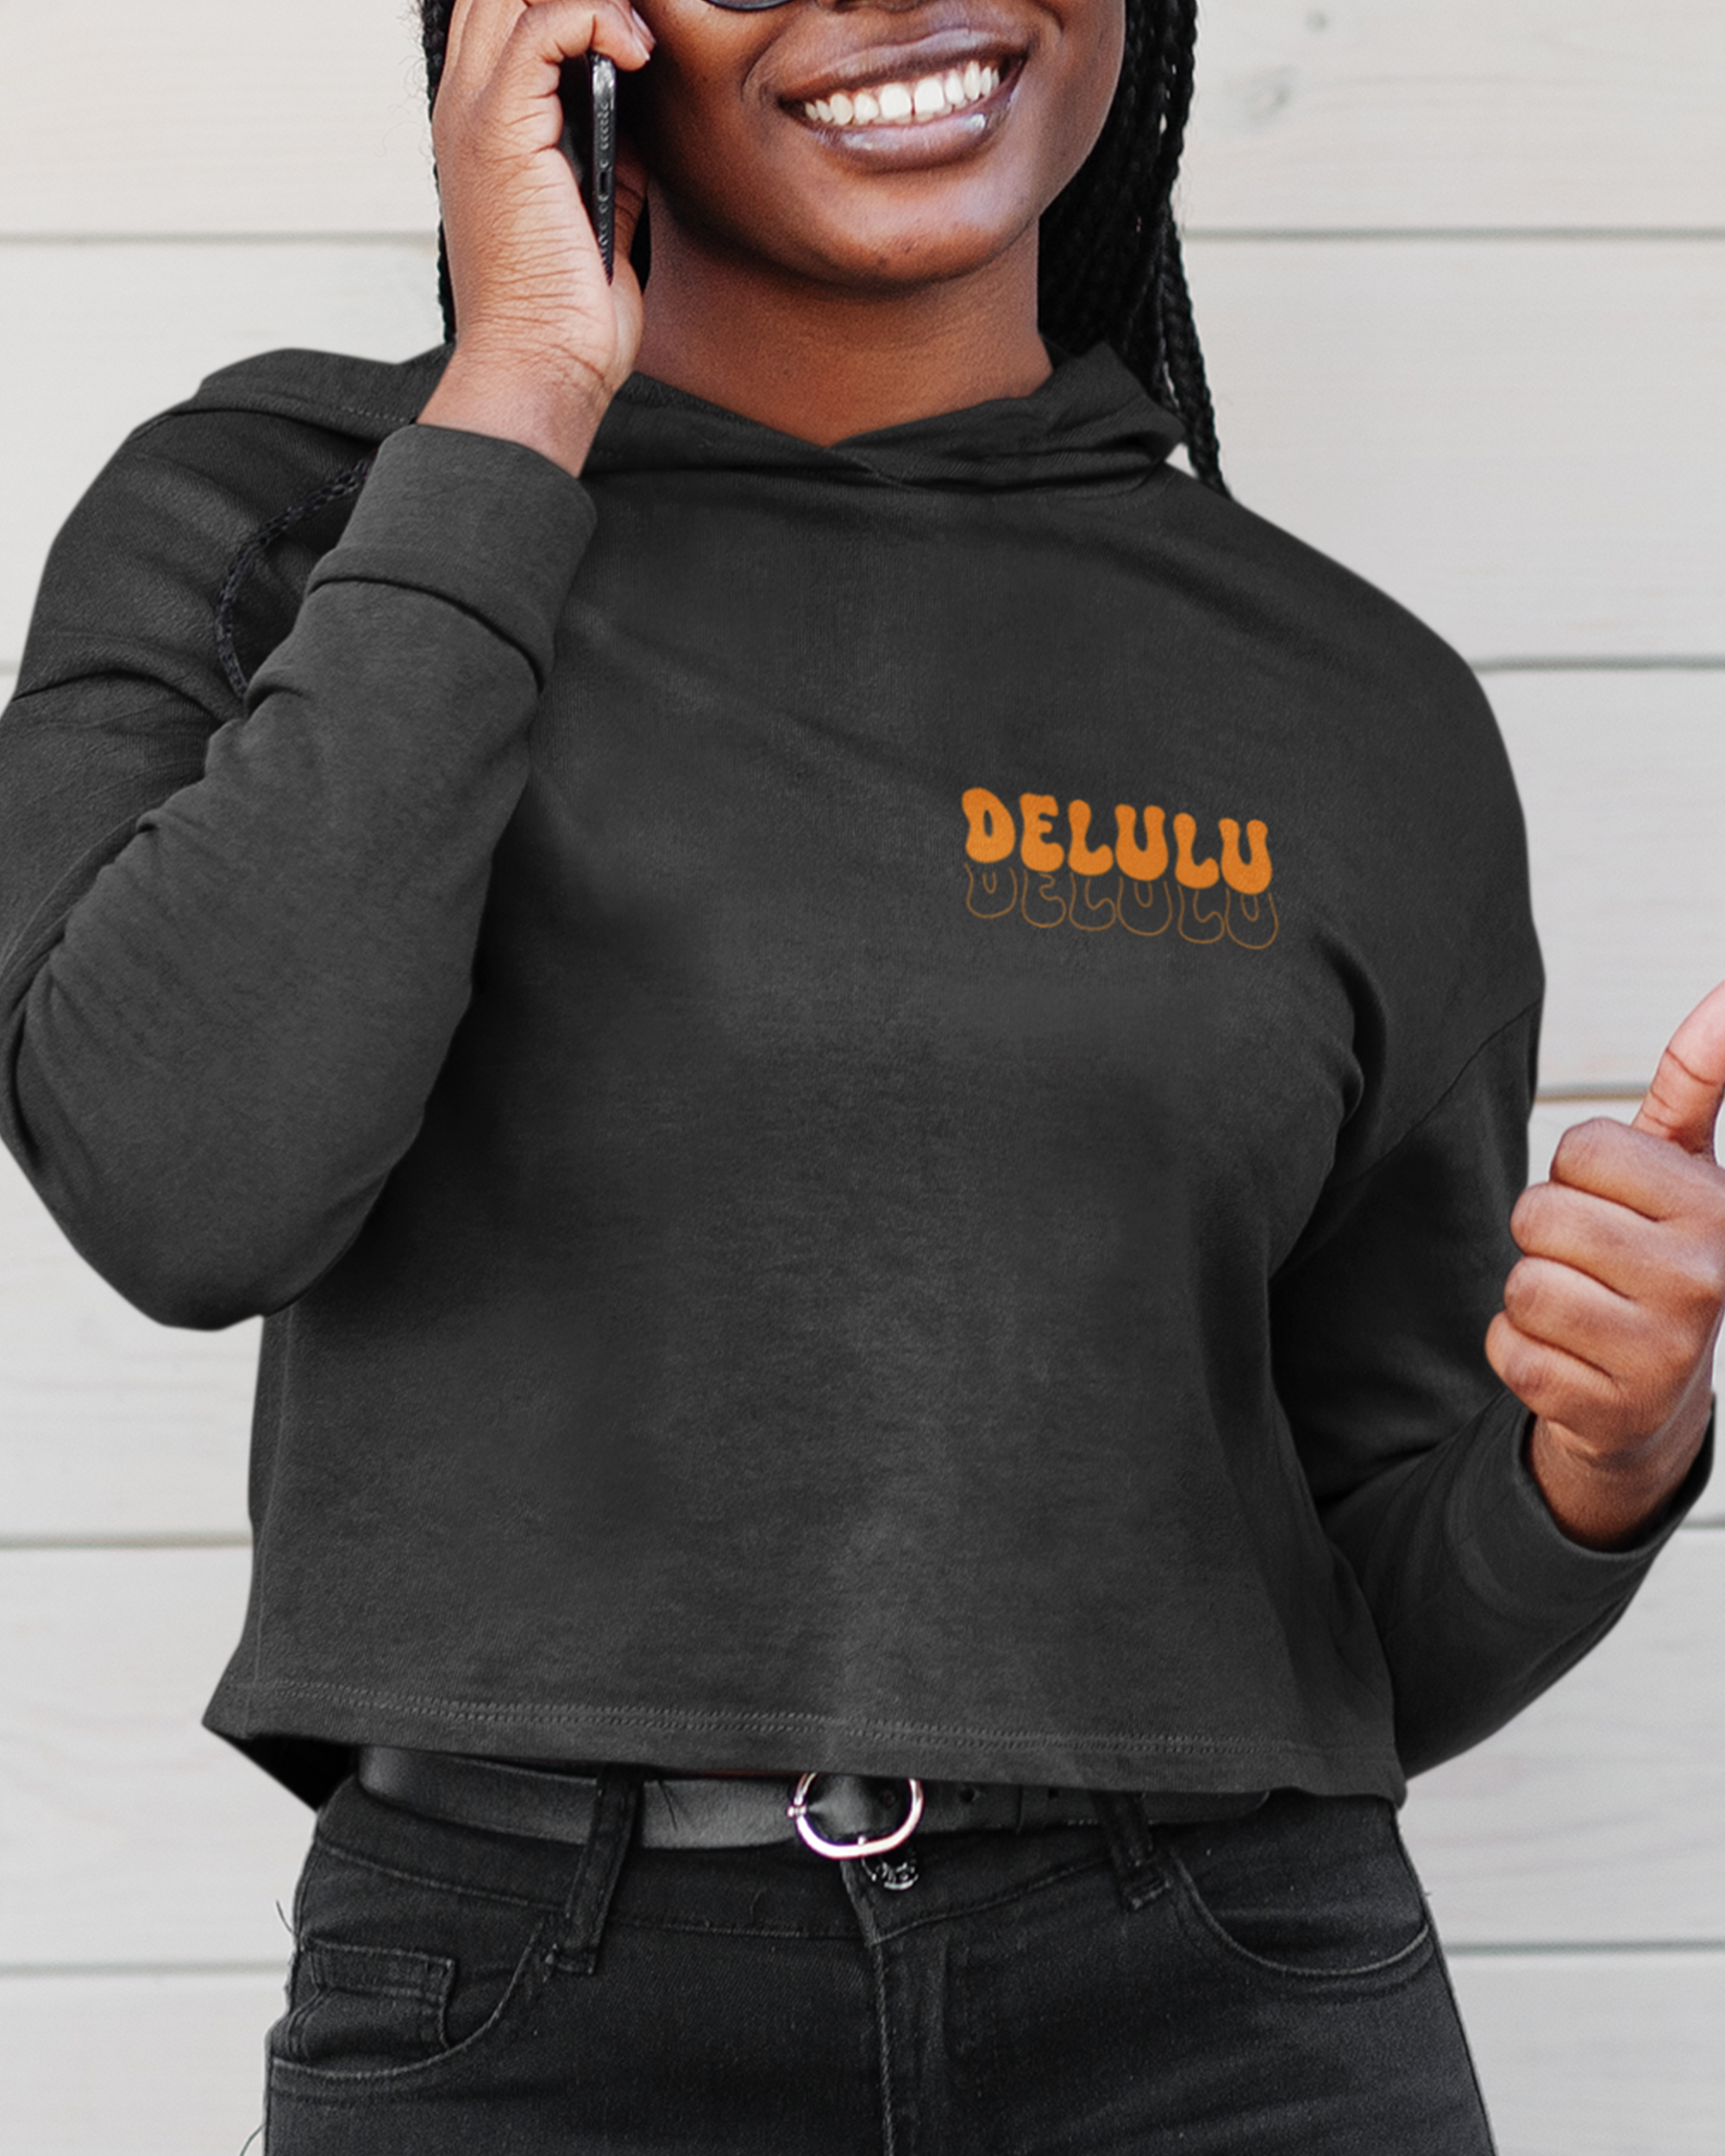 Delulu Is The Only Solulu Cropped Hoodie